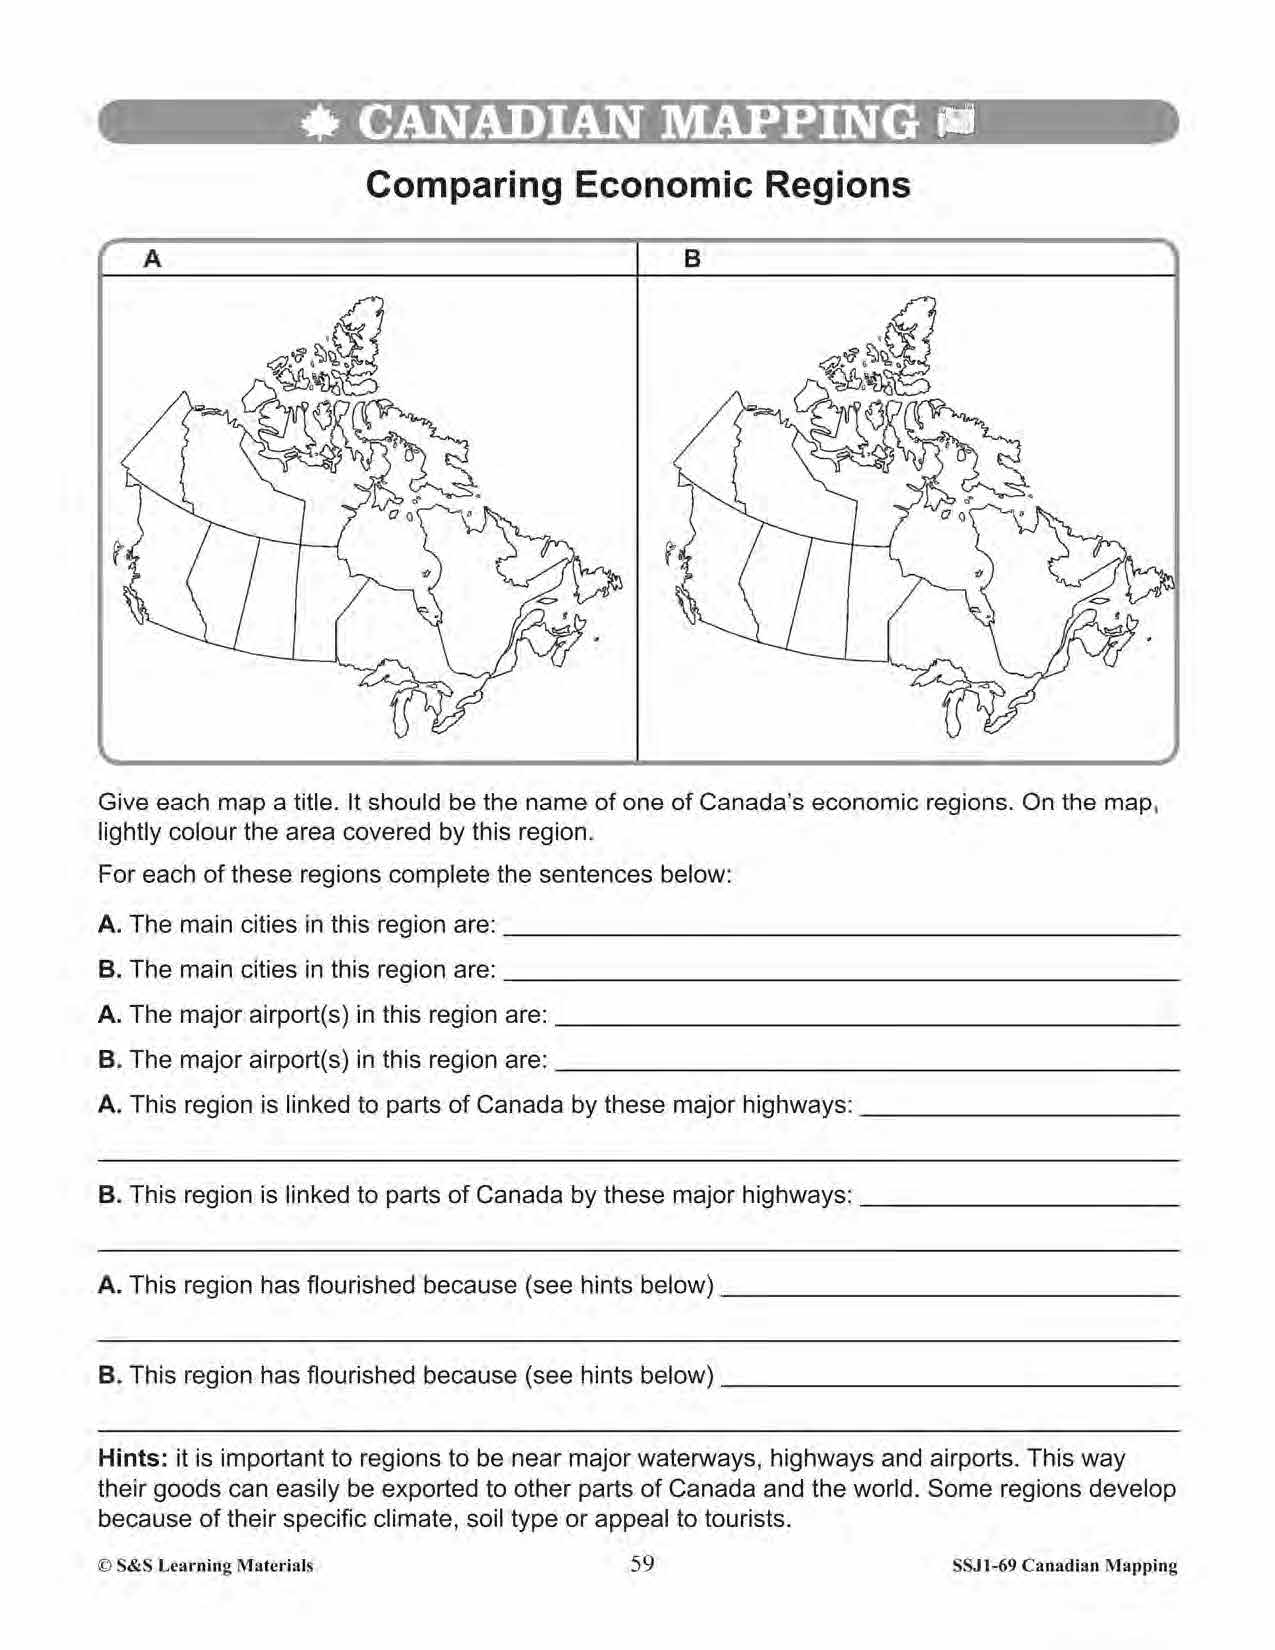 economic-regions-natural-resources-in-canada-mapping-worksheets-grad